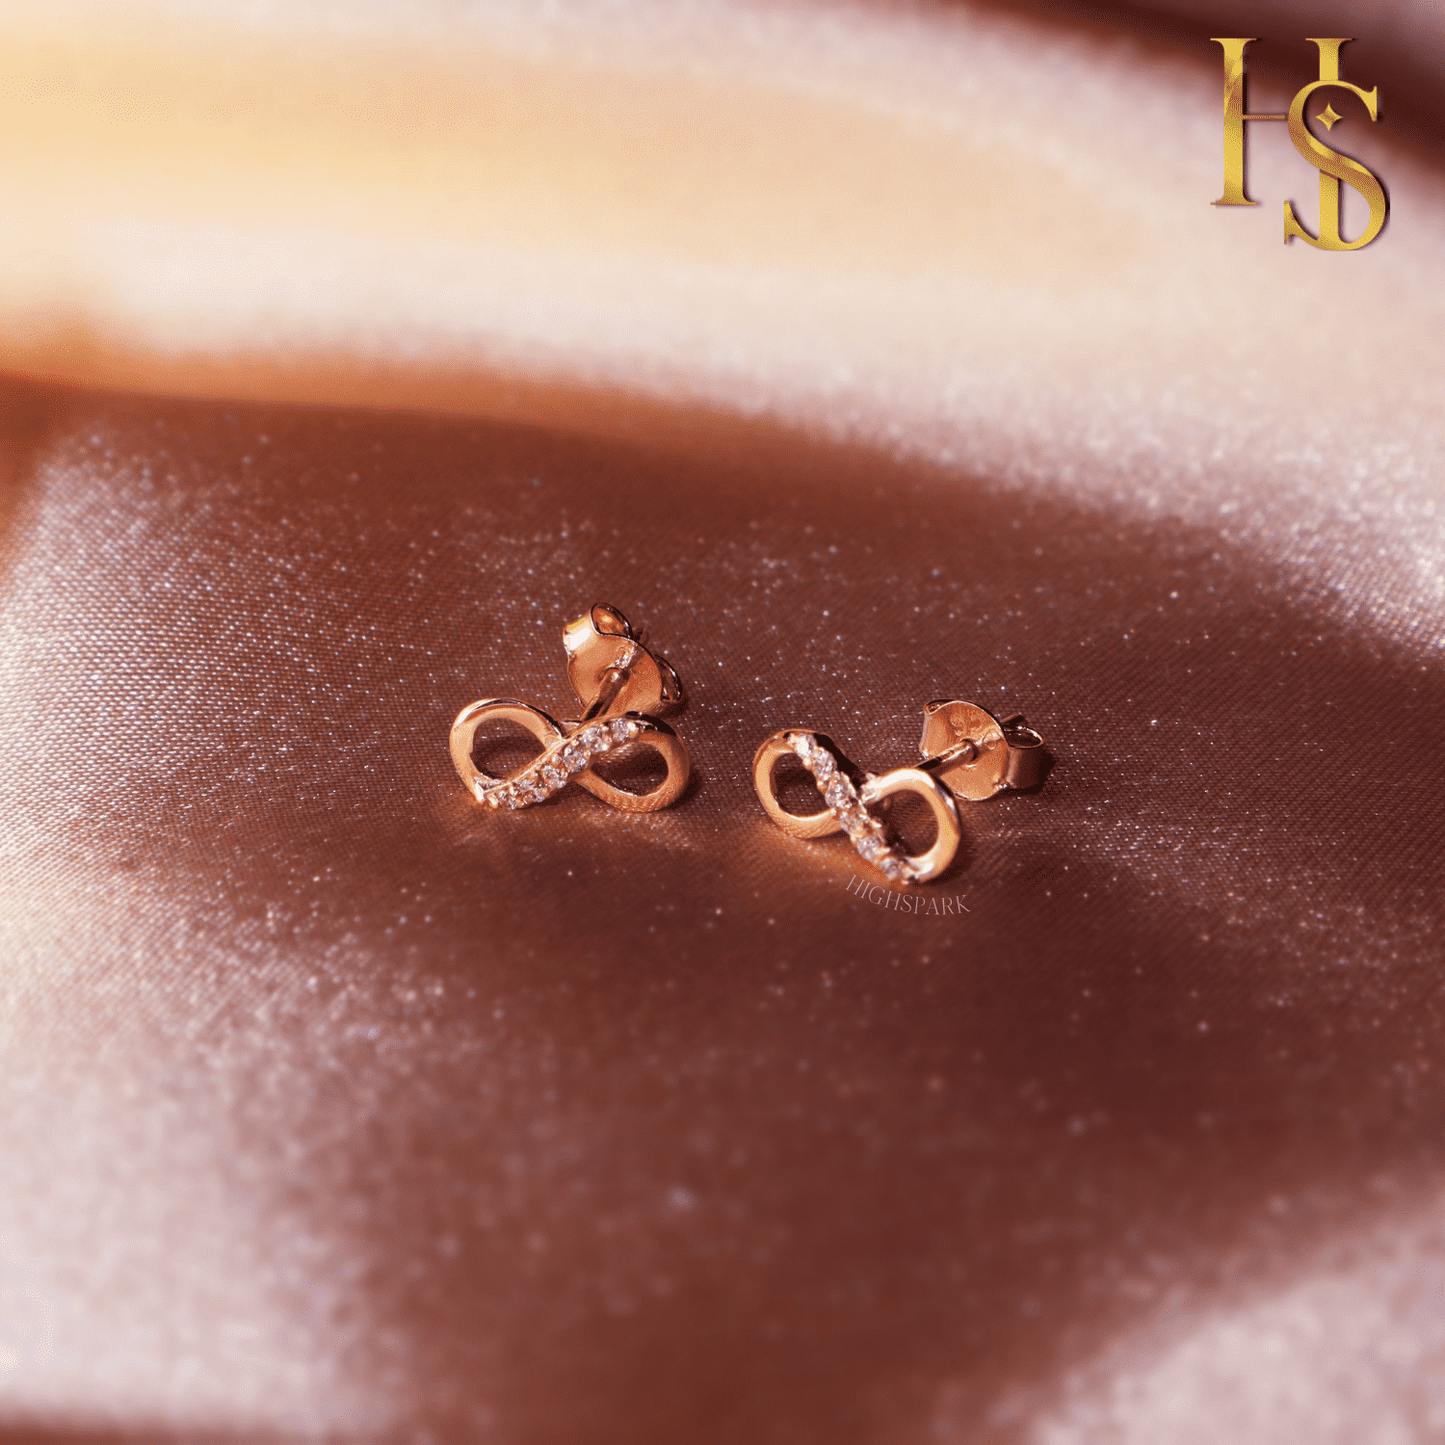 Rose Gold Infinity Stud Earrings in 92.5 Silver studded with Swiss Zirconia - 18K Rose Gold finish